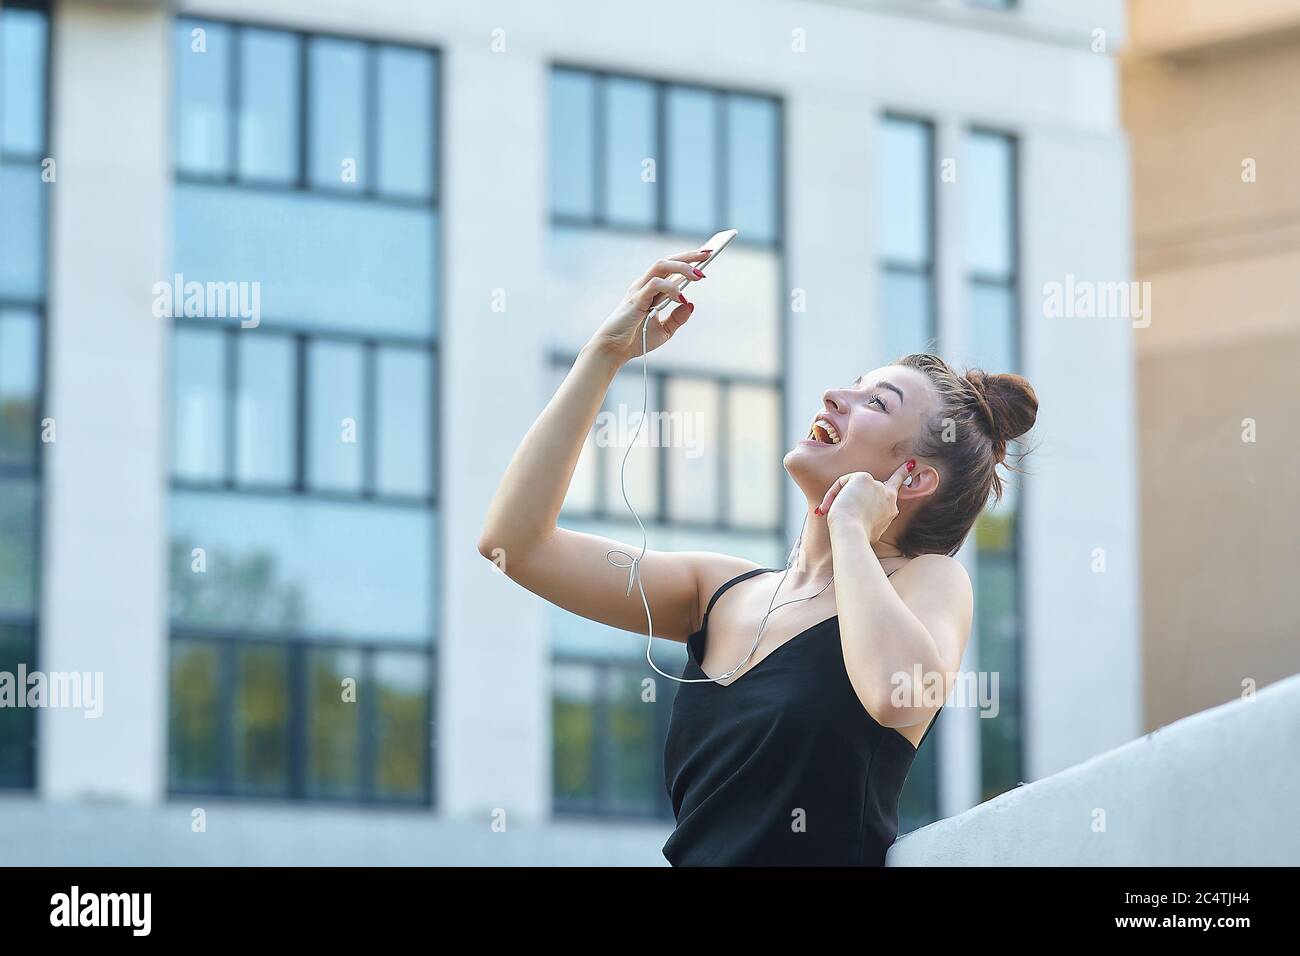 beautiful girl poses in the city, holding a smartphone and listening to music with headphones. Stock Photo